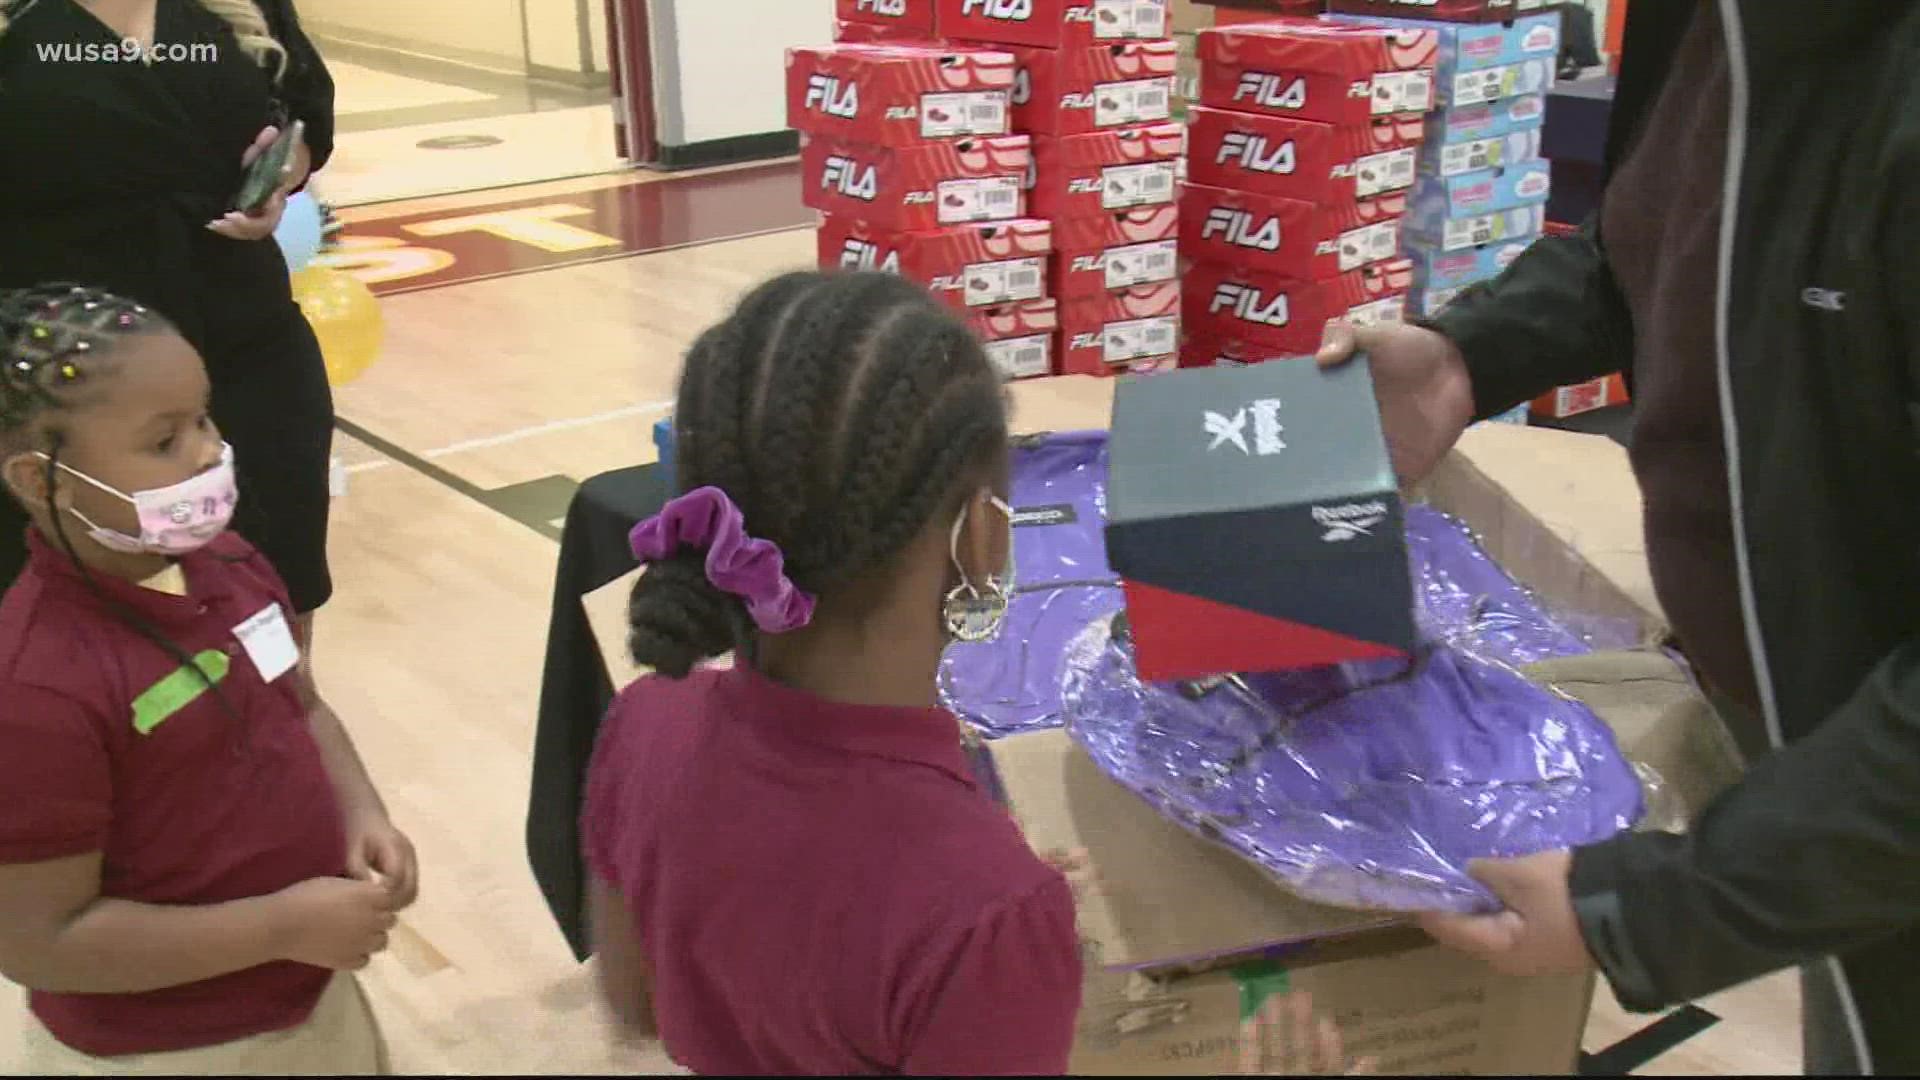 The initiative was led by SHOES THAT FIT, an organization that donates brand new sneakers to underprivileged kids across the country.